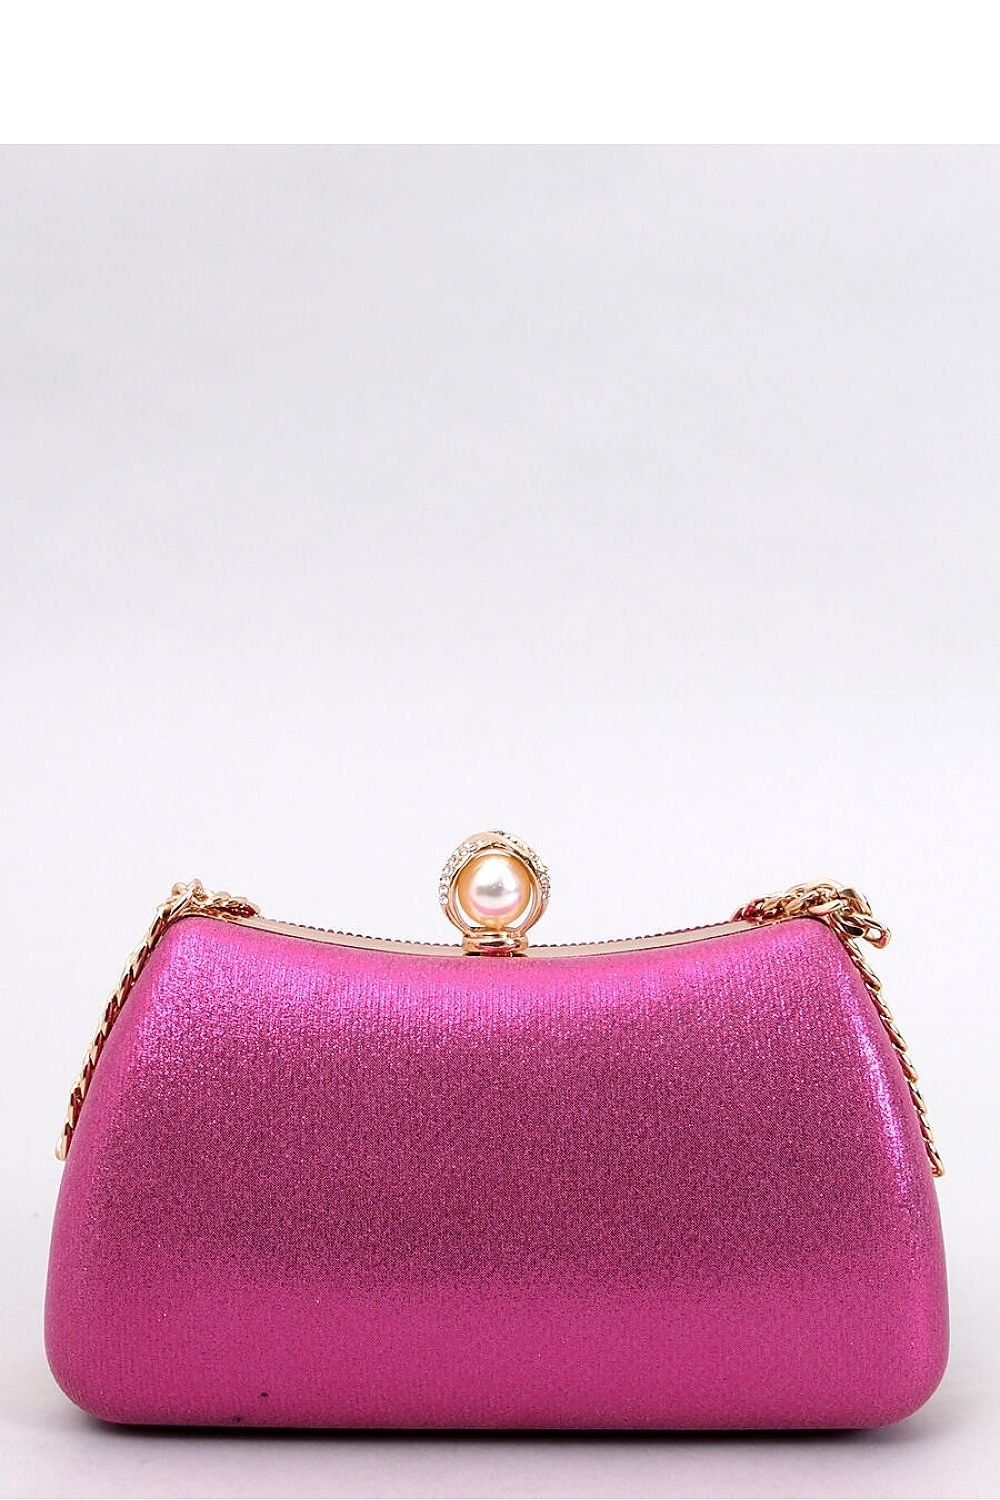 Envelope clutch bag - M&H FashionEnvelope clutch bagM&H FashionM&H Fashion189607_1103865one-size-fits-allEnvelope clutch bag InelloM&H FashionM&H FashionLadies formal handbag ? clutch bag with chain. It is fastened from the top with a striking clasp with pearl and stones. It can be worn in two ways ? in hand like a cEnvelope clutch bag